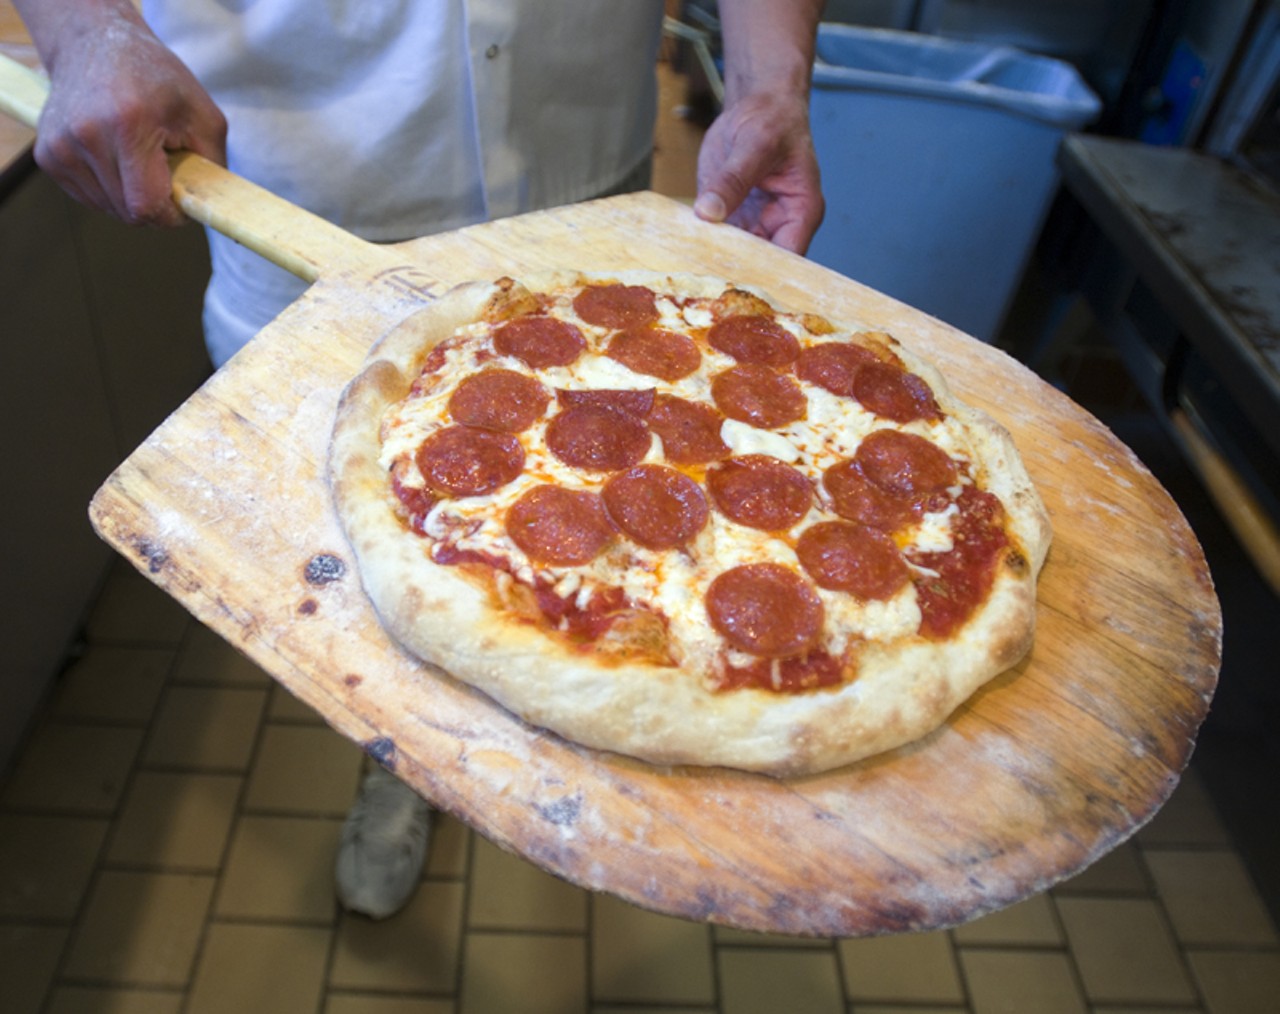 A pepperoni pizza has a rustic appeal. The dough is made from scratch at the restaurant.